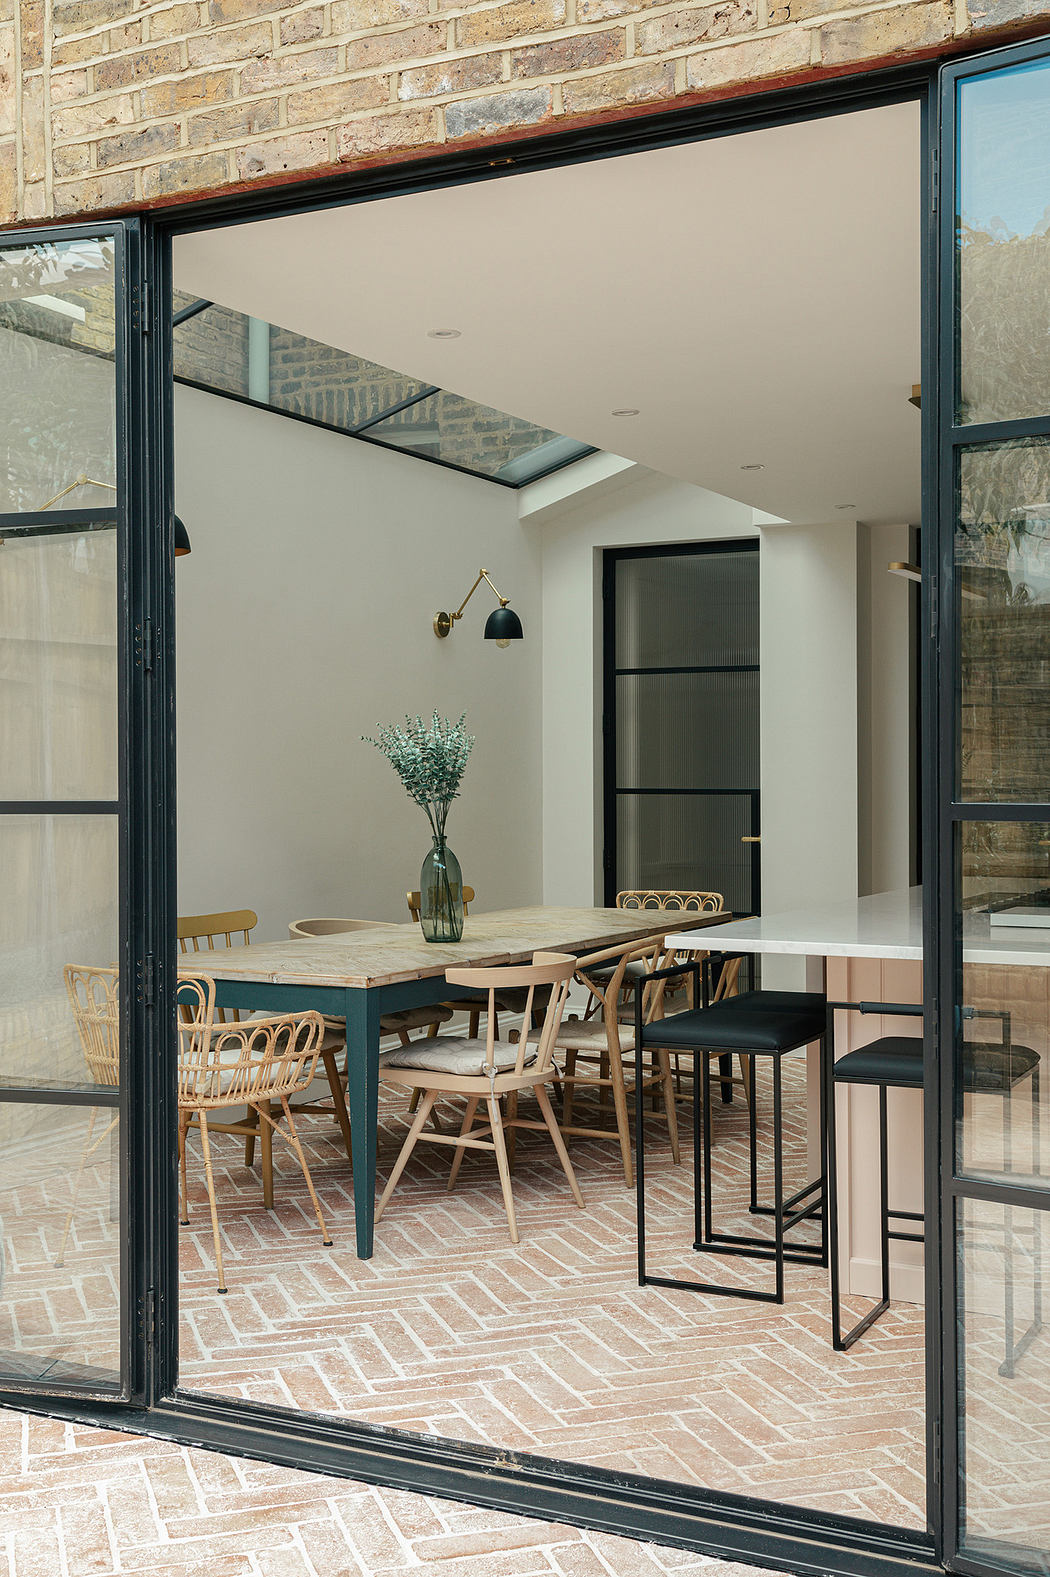 Modern dining area with large glass doors, herringbone brick floor, and natural